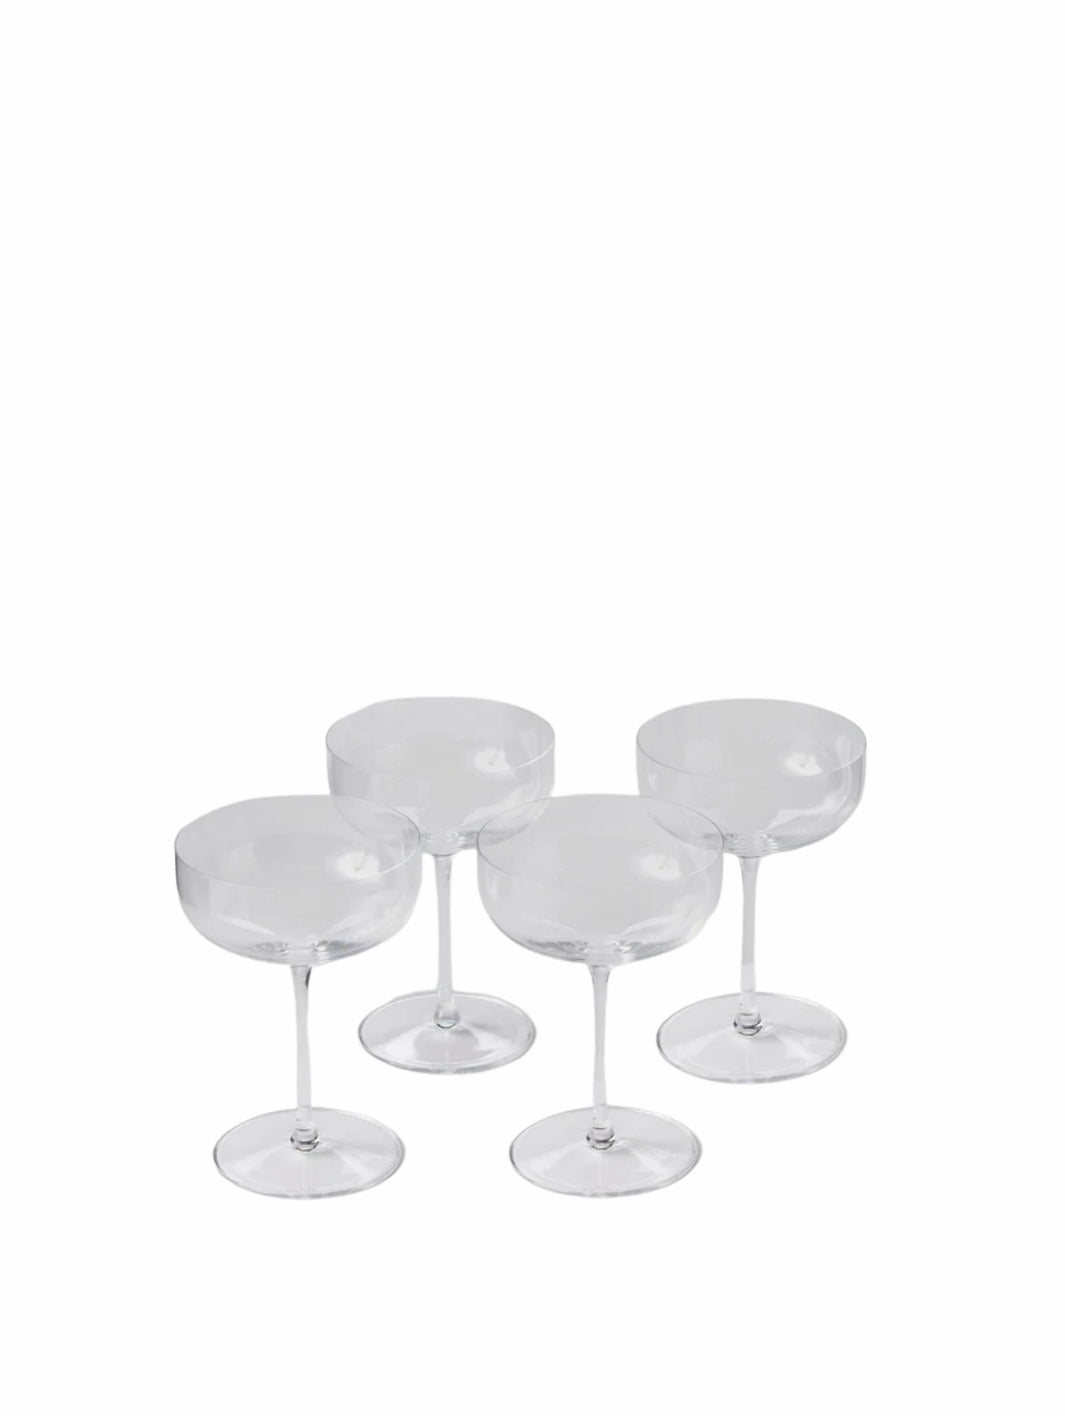 FABLE The Coupe Glasses (4-Pack)